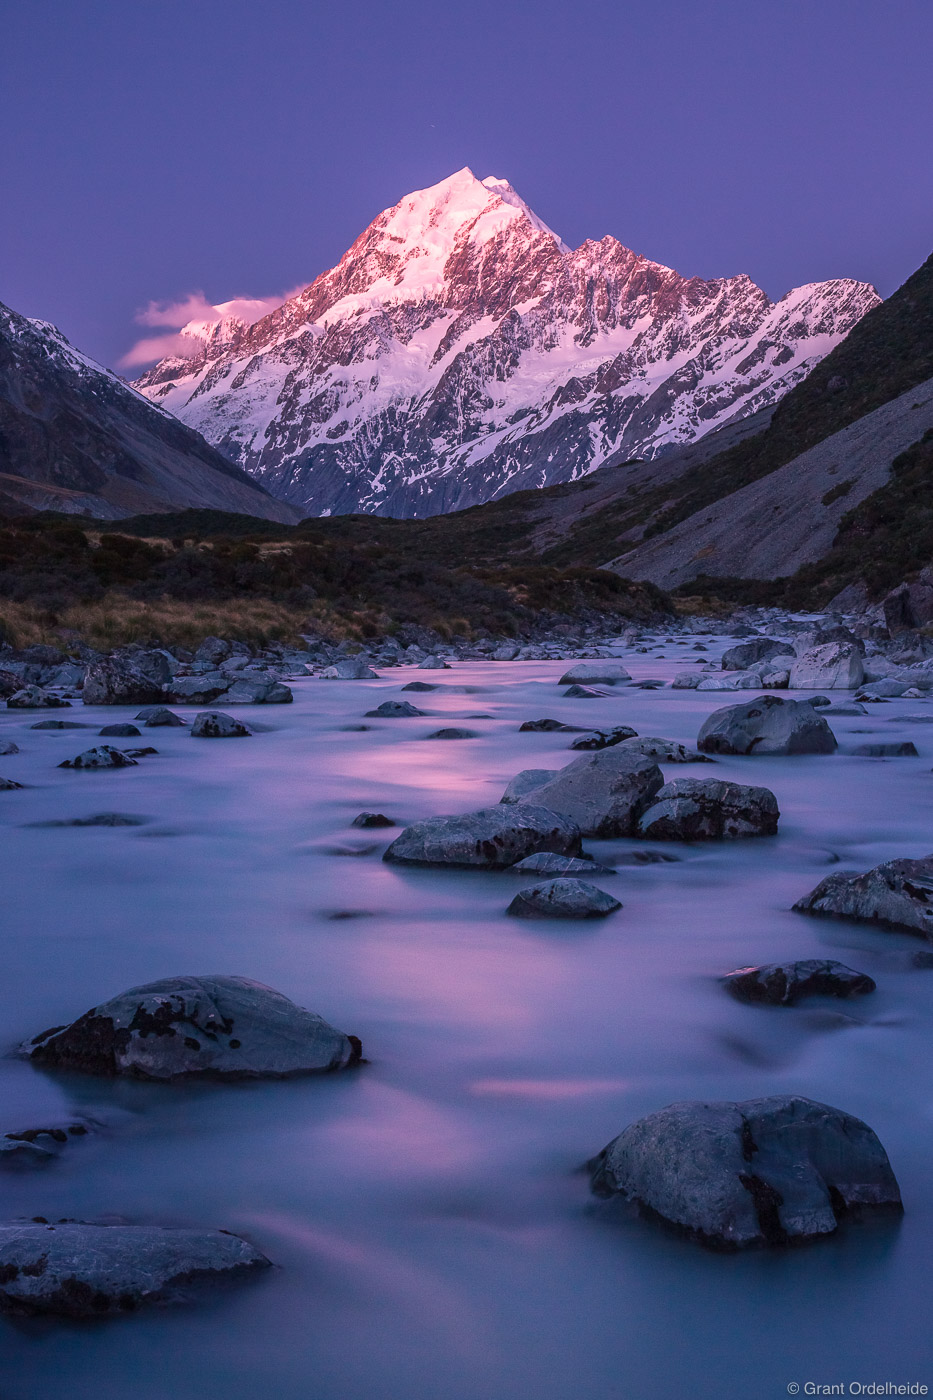 Dusk over Mt. Cook, the highest point in New Zealand, from the Hooker Valley Track.